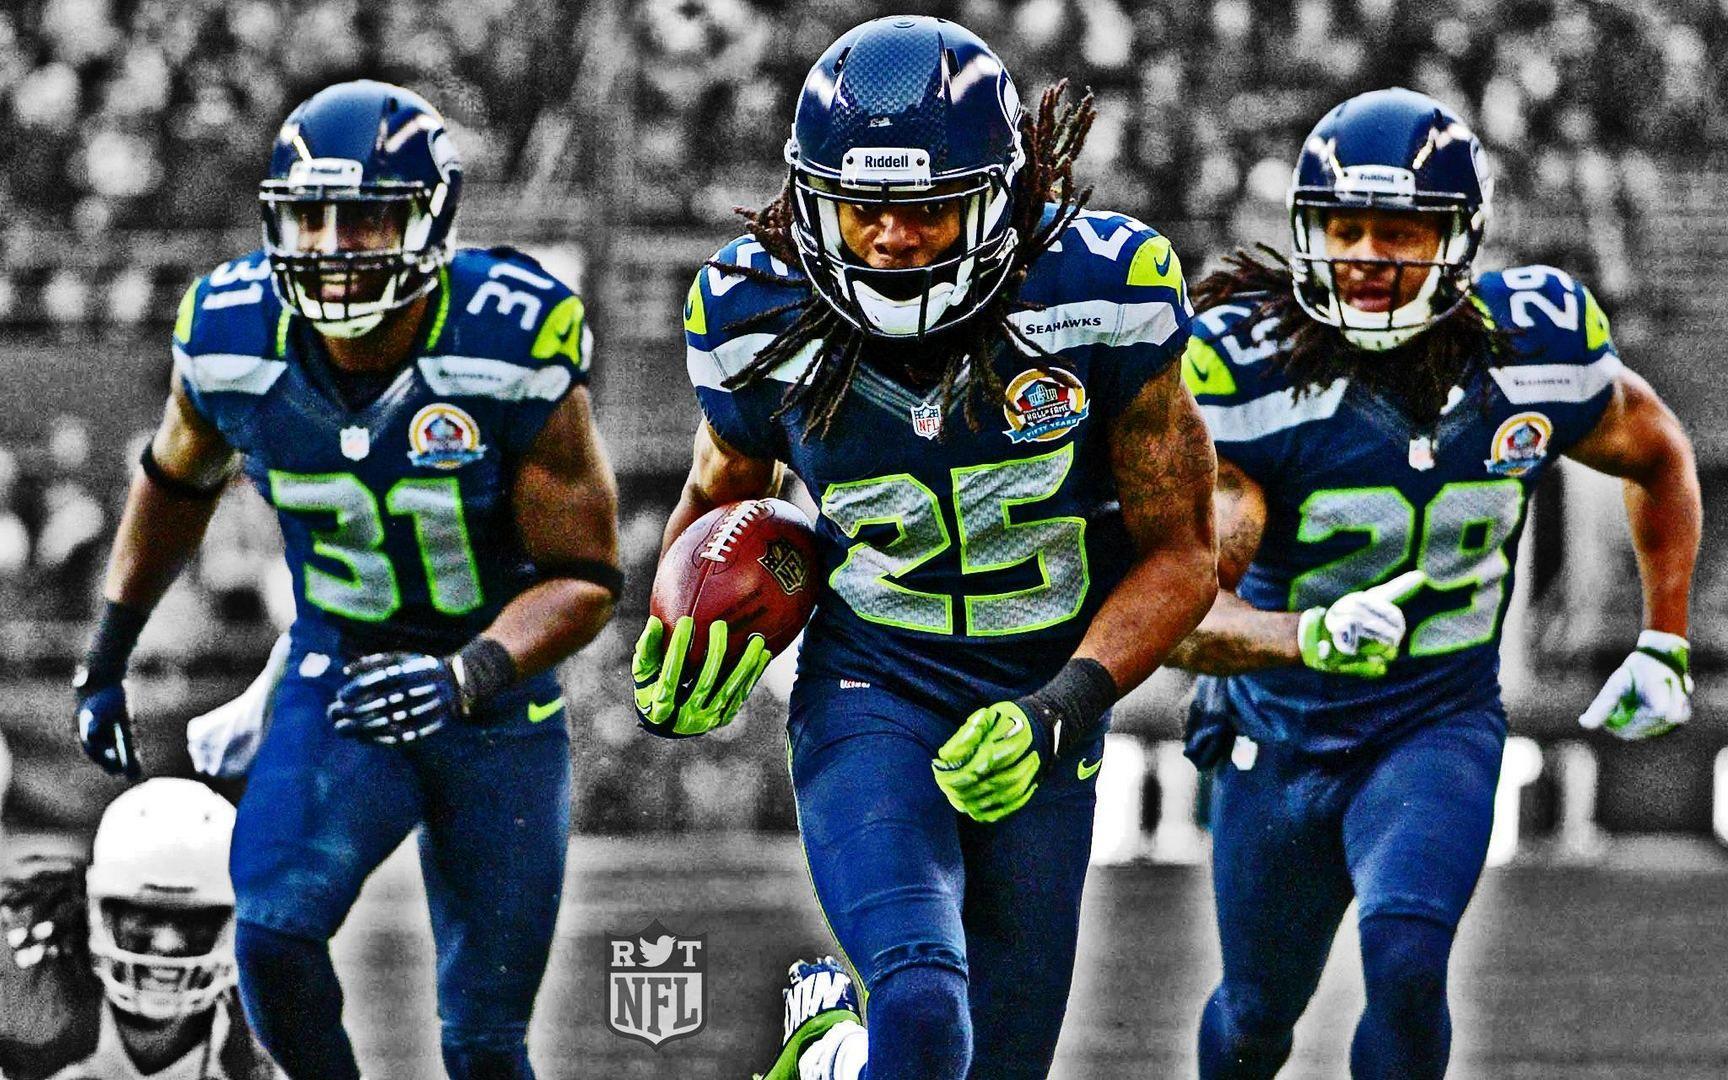 Image Gallery of Kam Chancellor Wallpaper